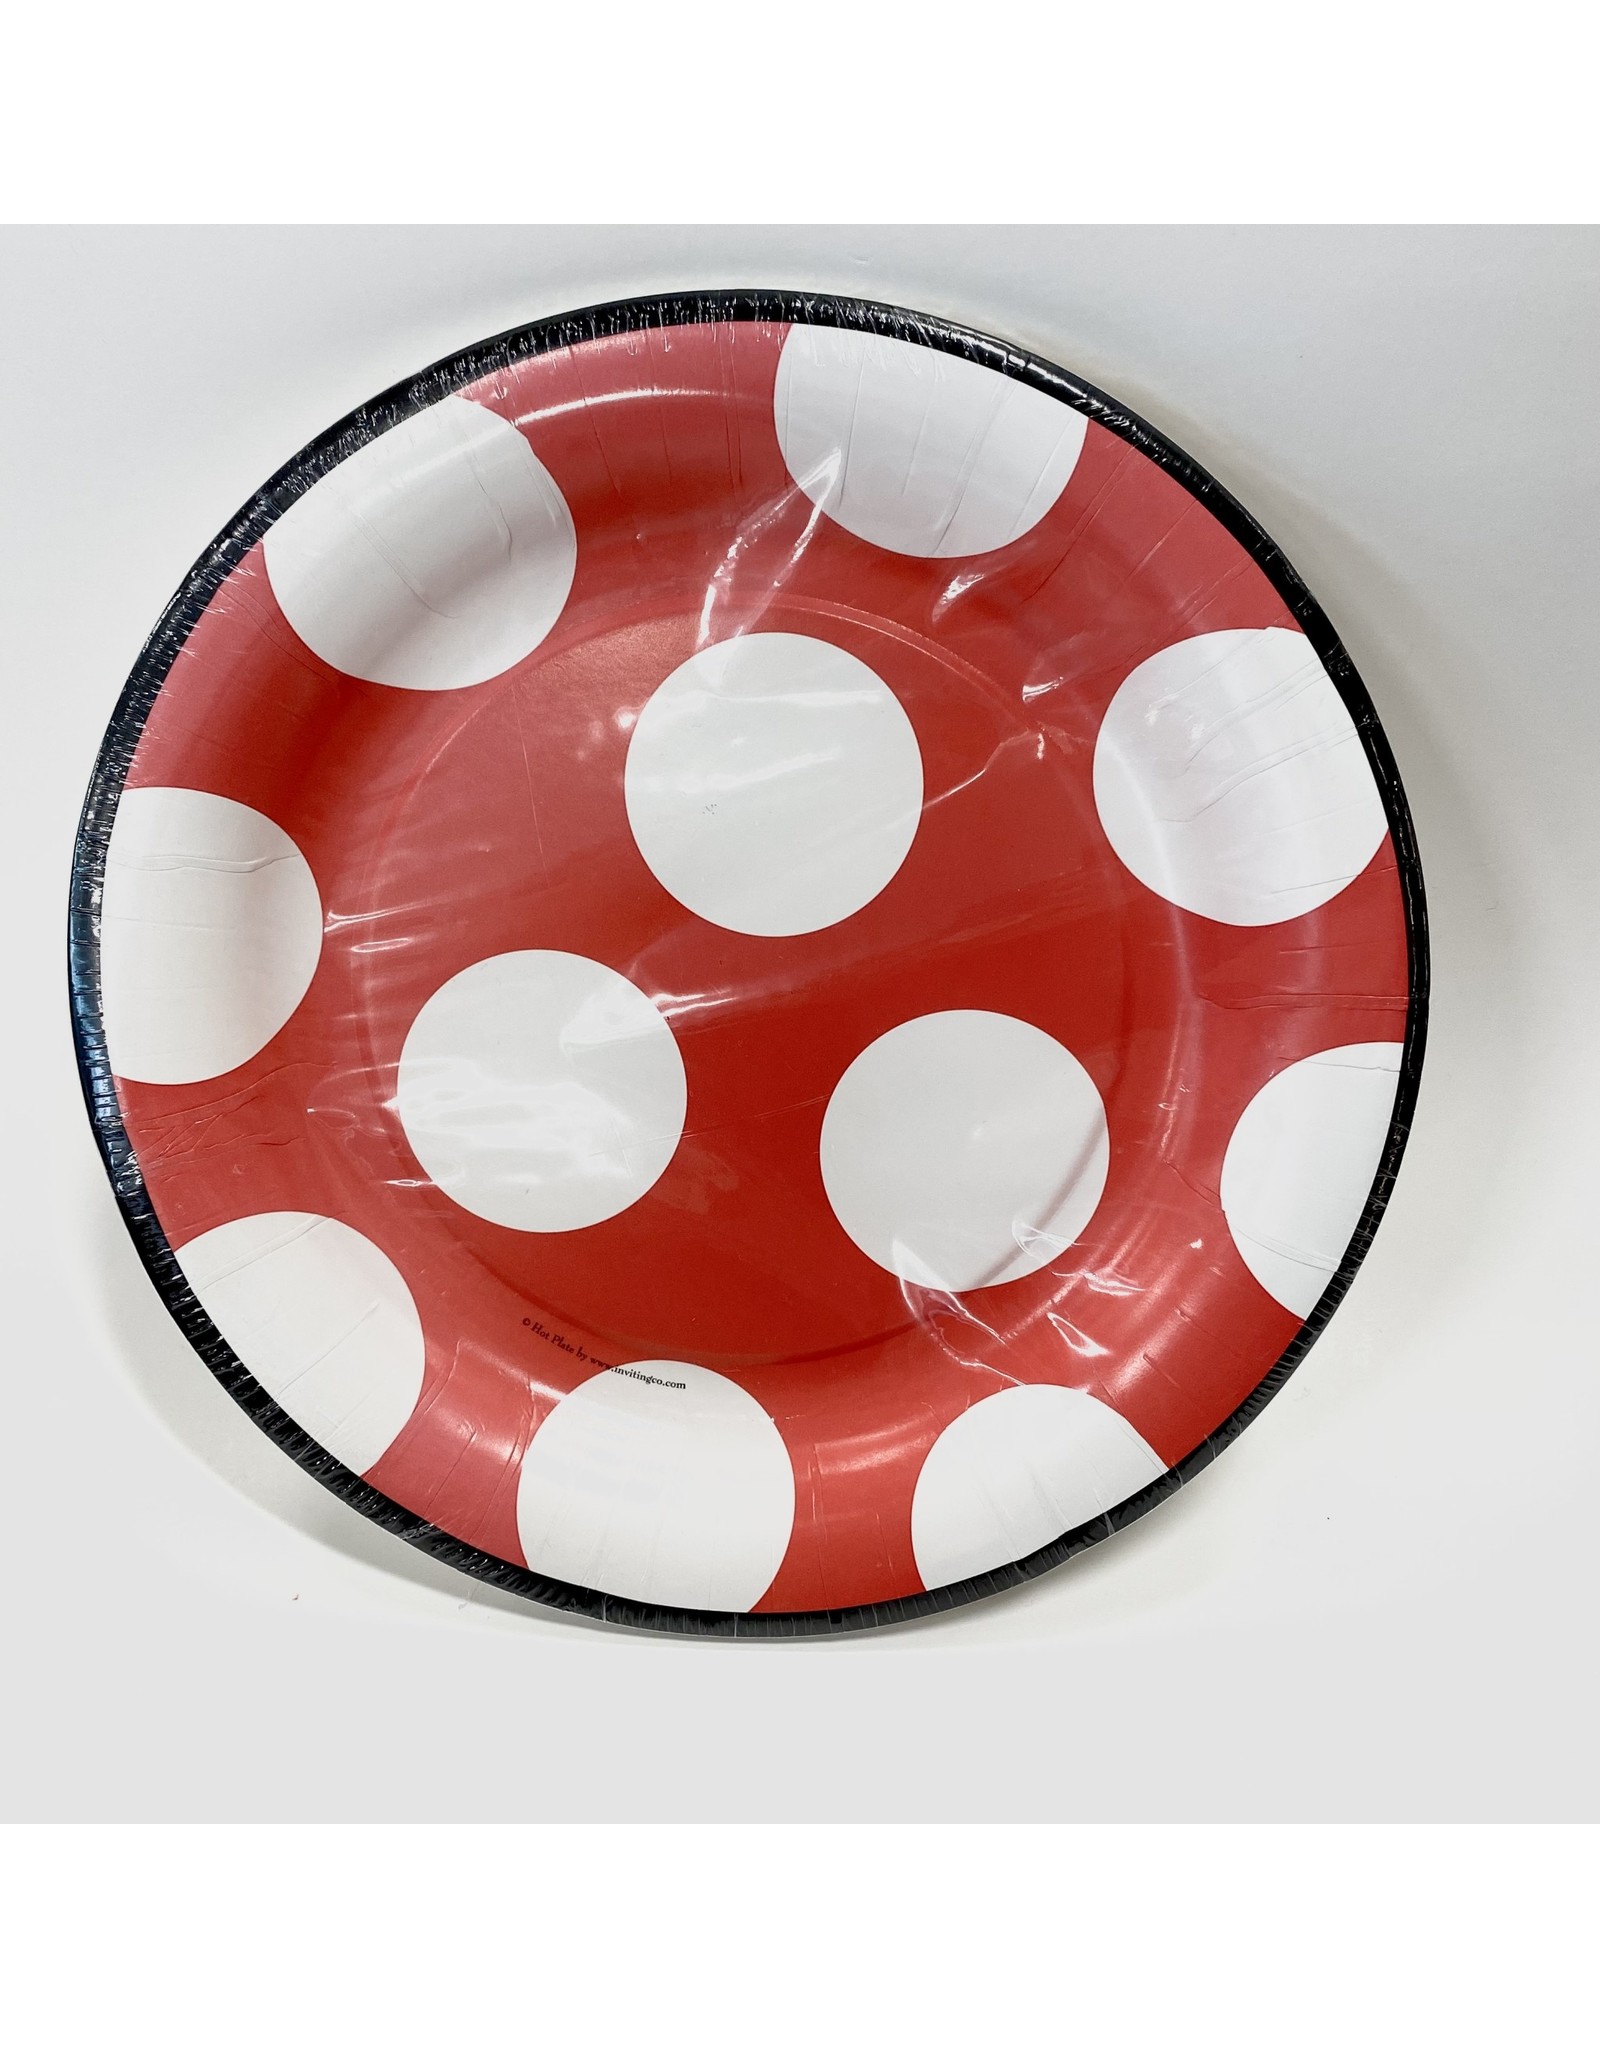 SALE Paper Plate Dinner Dots